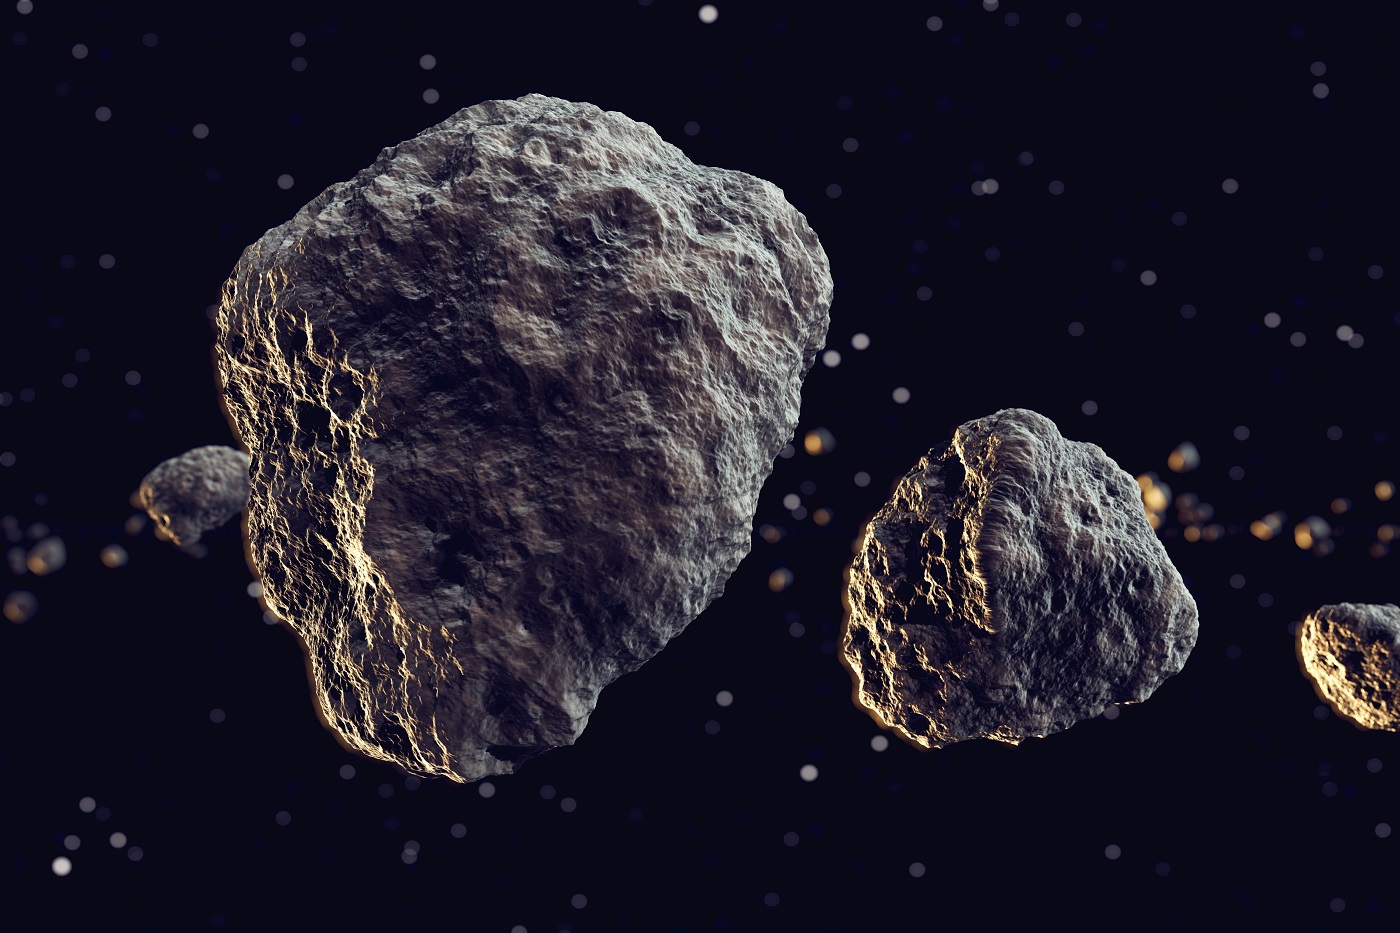 Closeup on meteor lumps in space. Dark background. Suitable for any fantasy, astronomy or space related purposes.